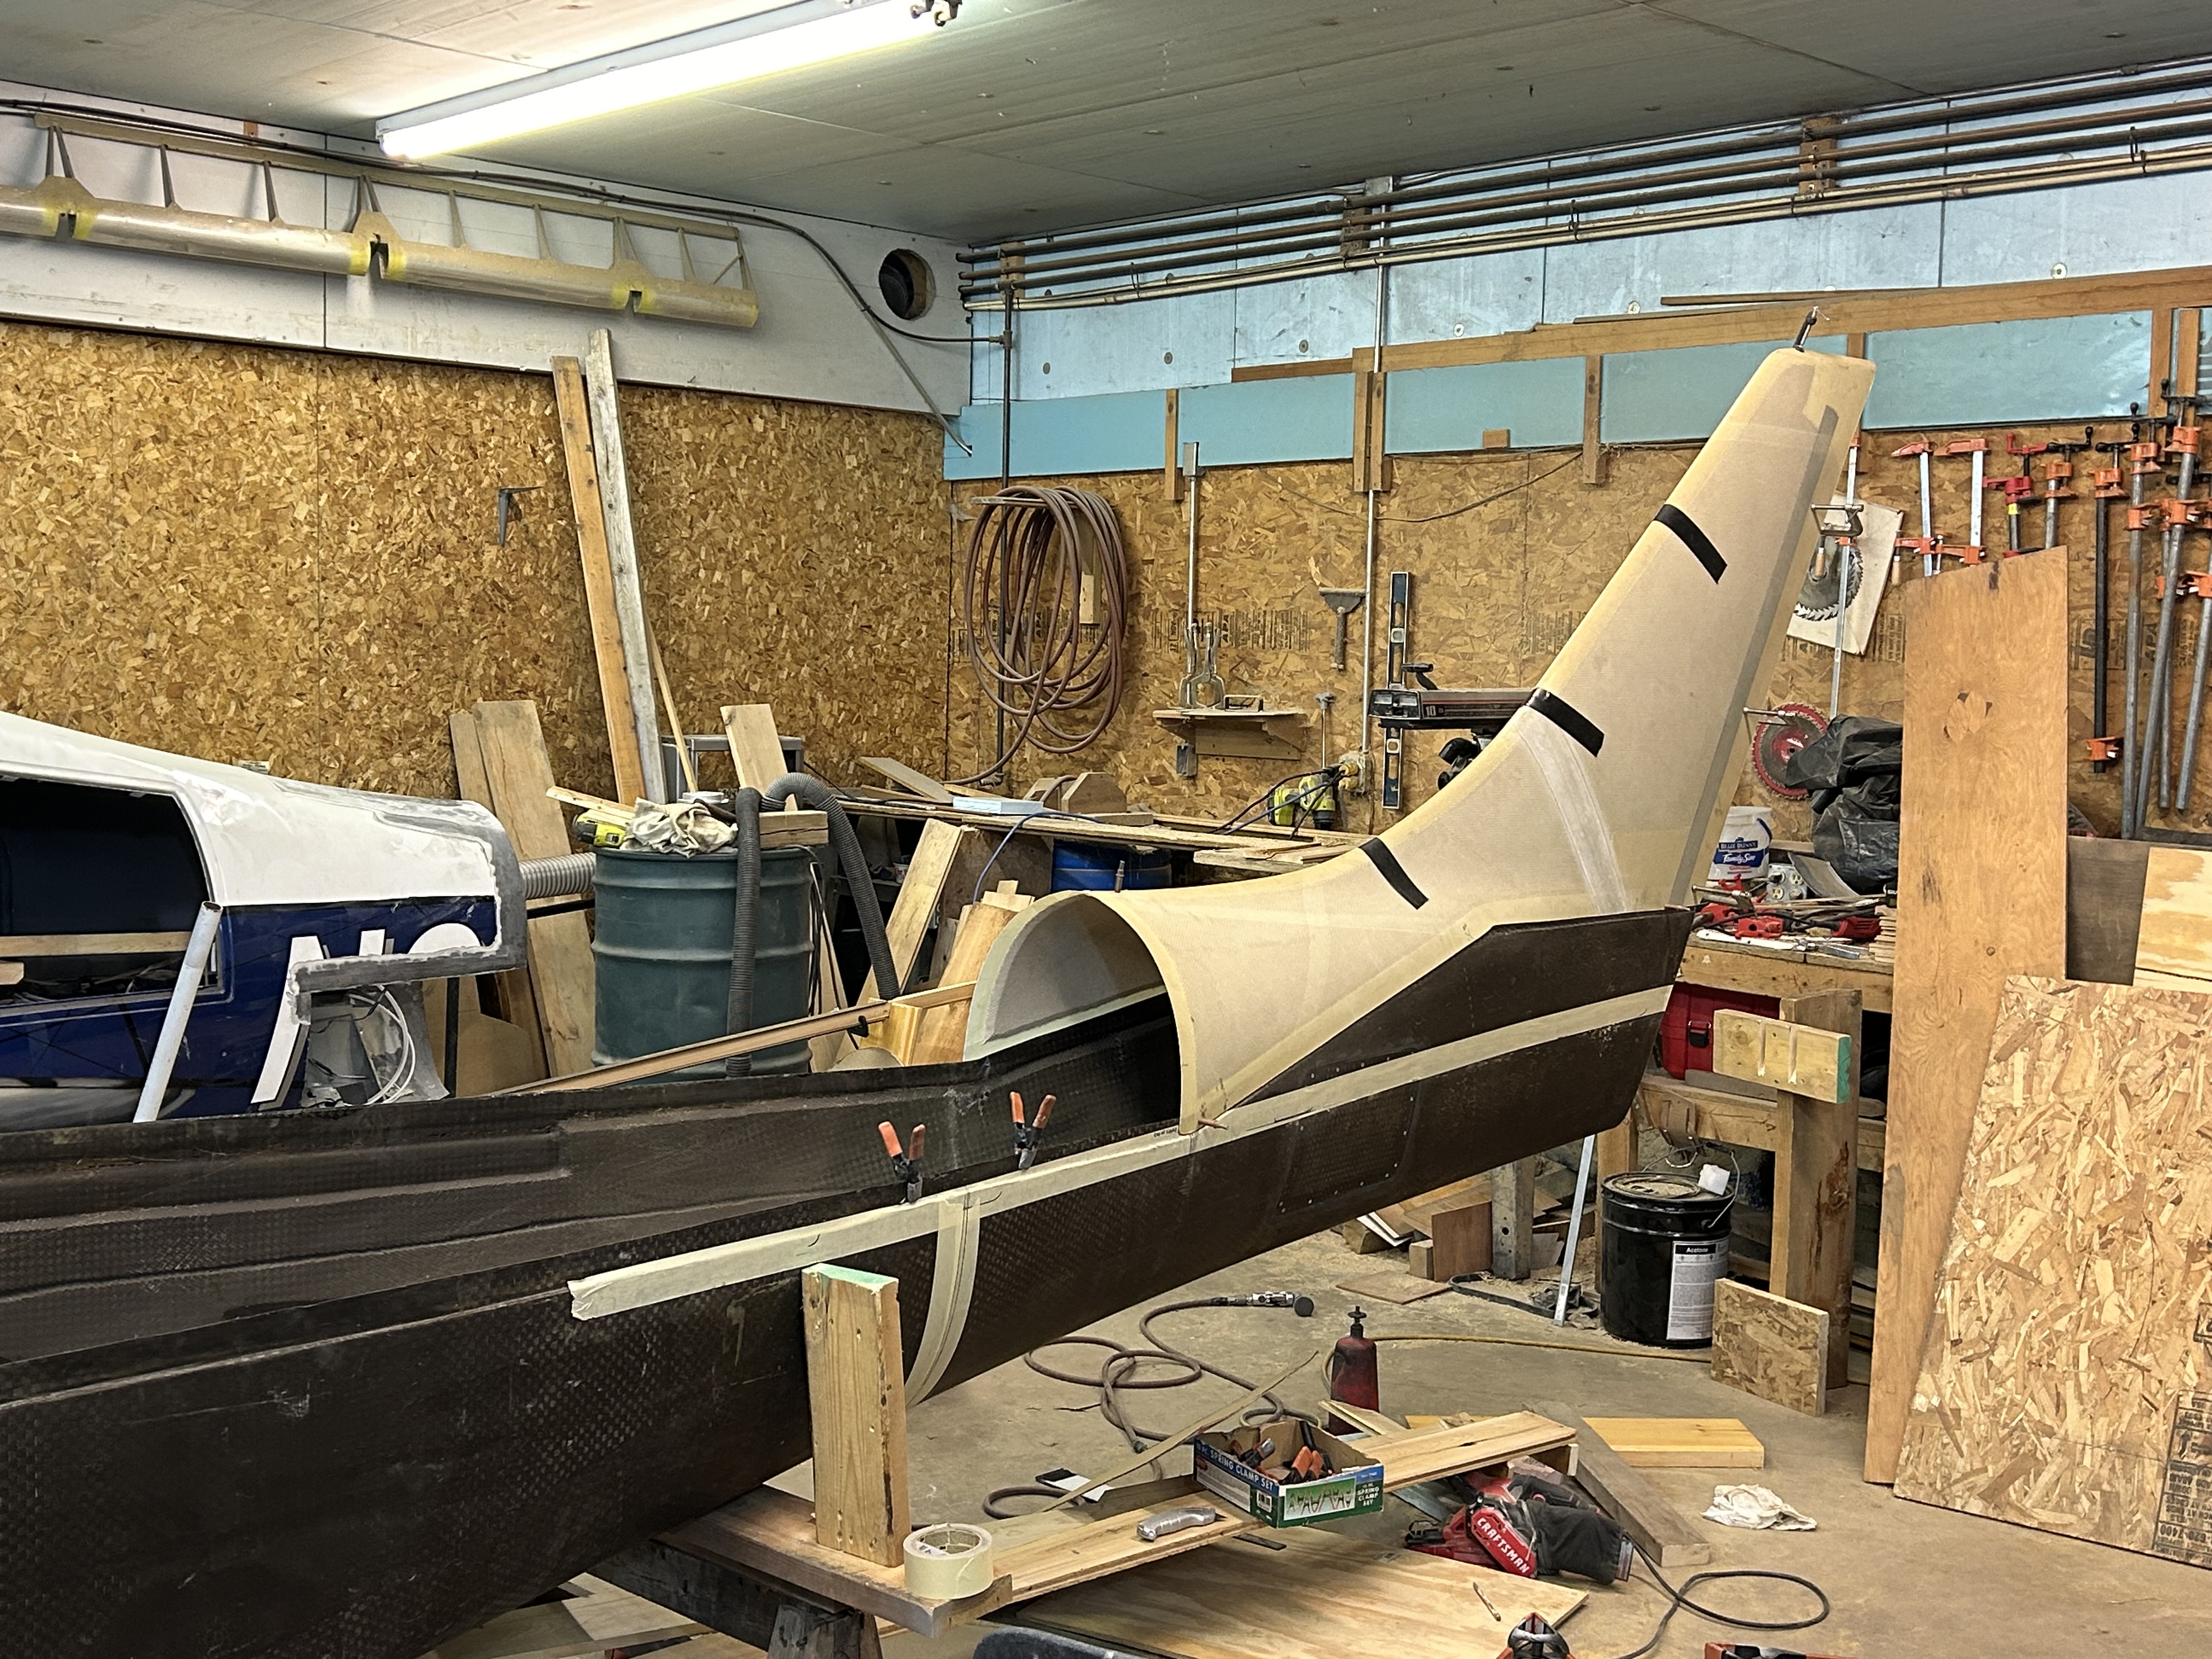 Vertical fitted to new lower fuselage section